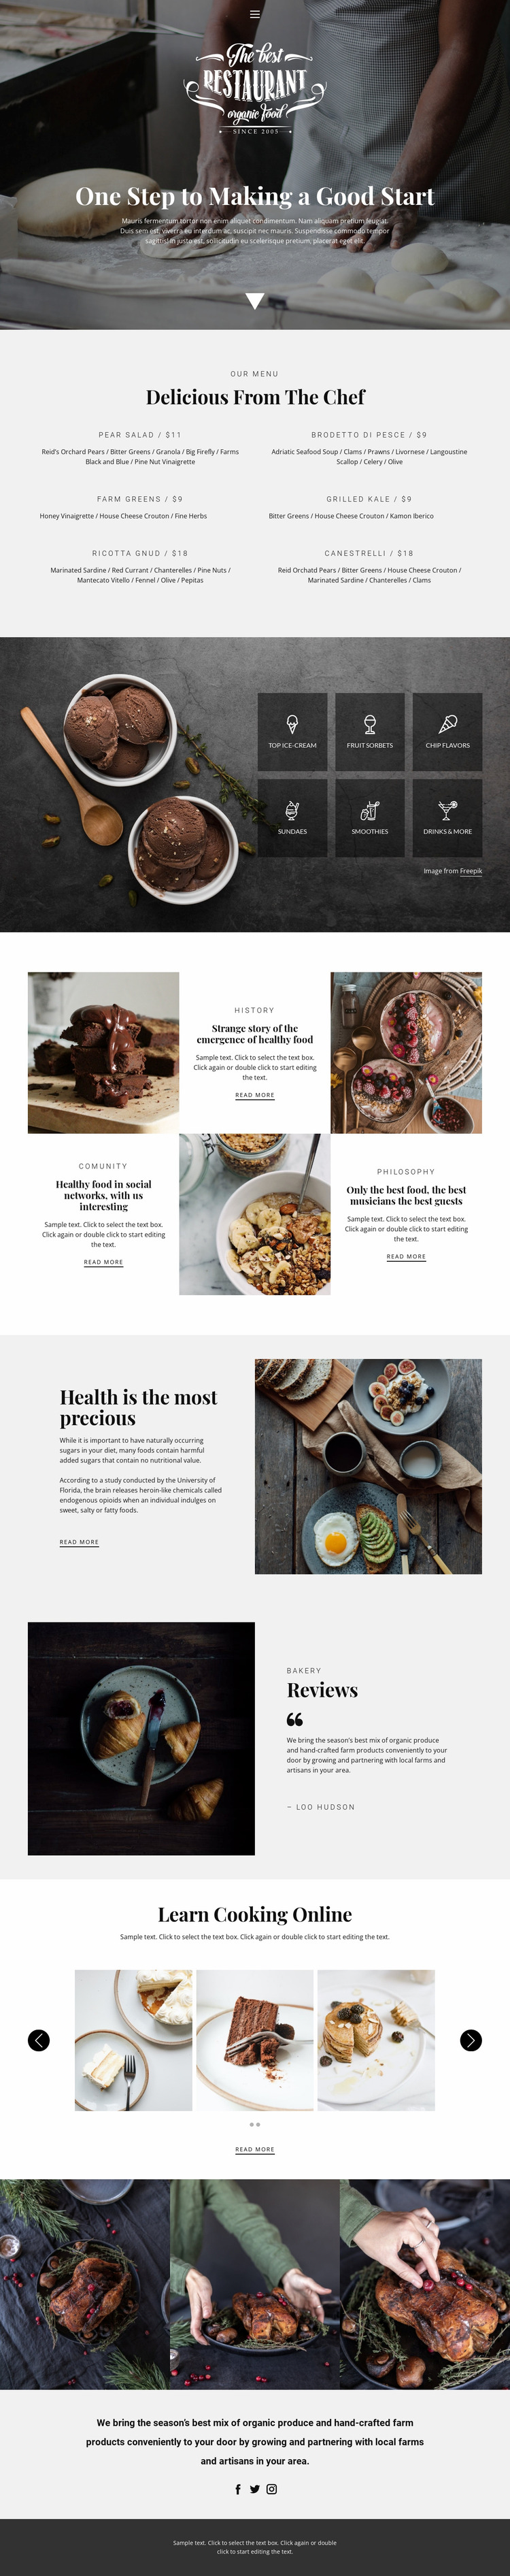 Recipes and cook lessons Website Mockup